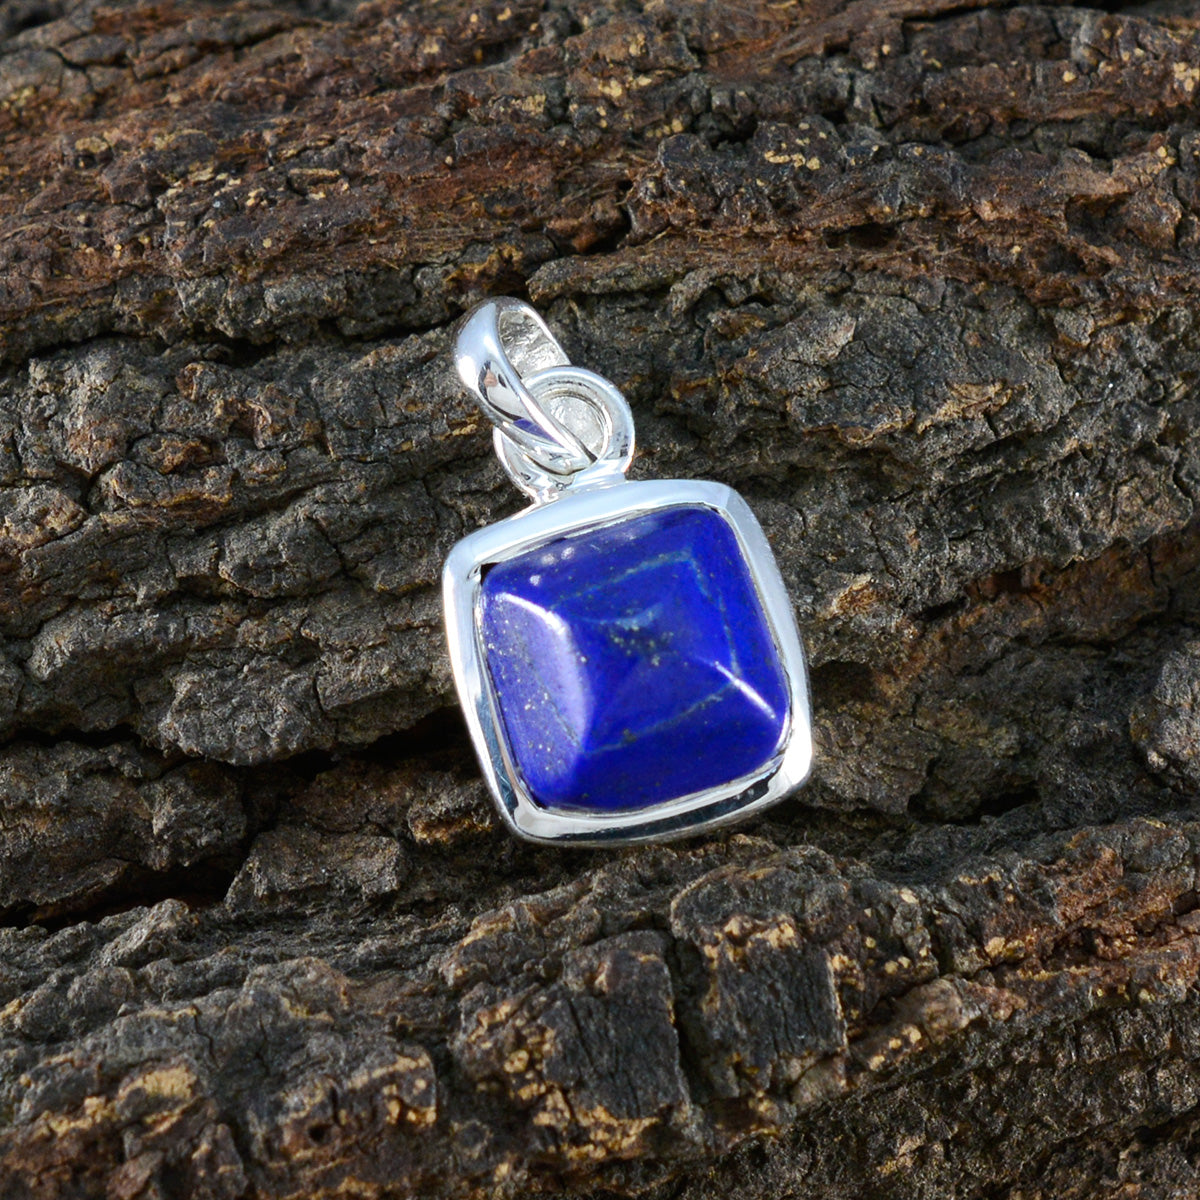 Riyo Real Gemstone Square Faceted Nevy Blue Lapis Lazuli Sterling Silver Pendant Gift For Friend